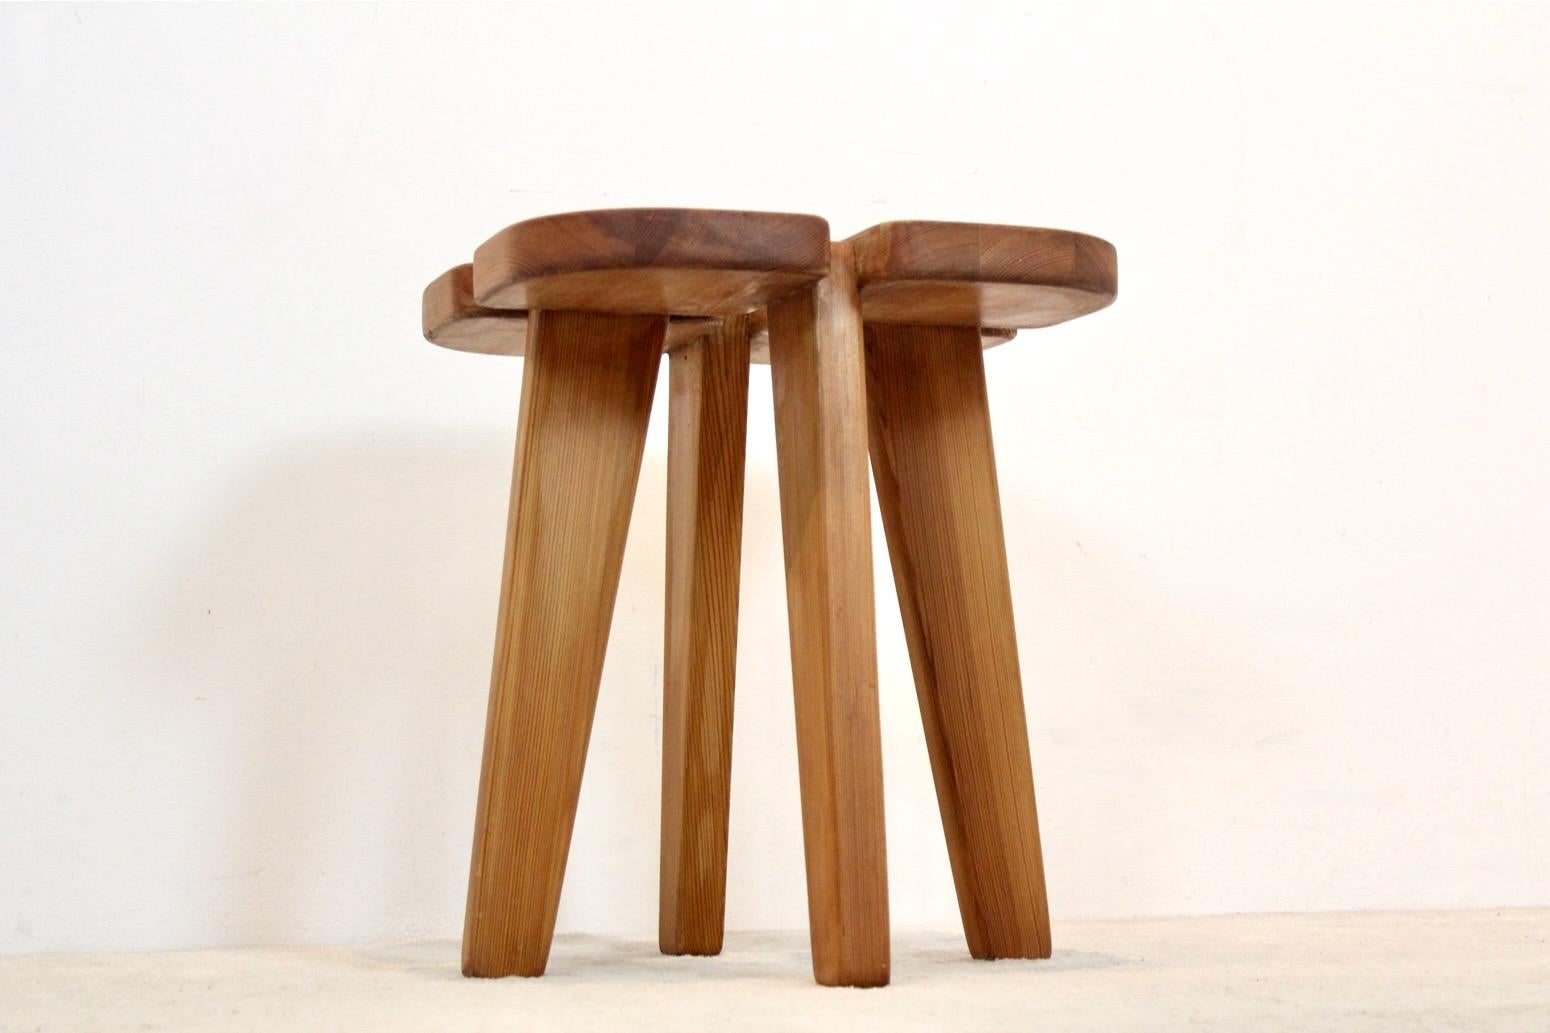 Finnish Stunning ‘Apila’ Stool designed by Rauni Peippo and manufactured by Stockmann Or For Sale